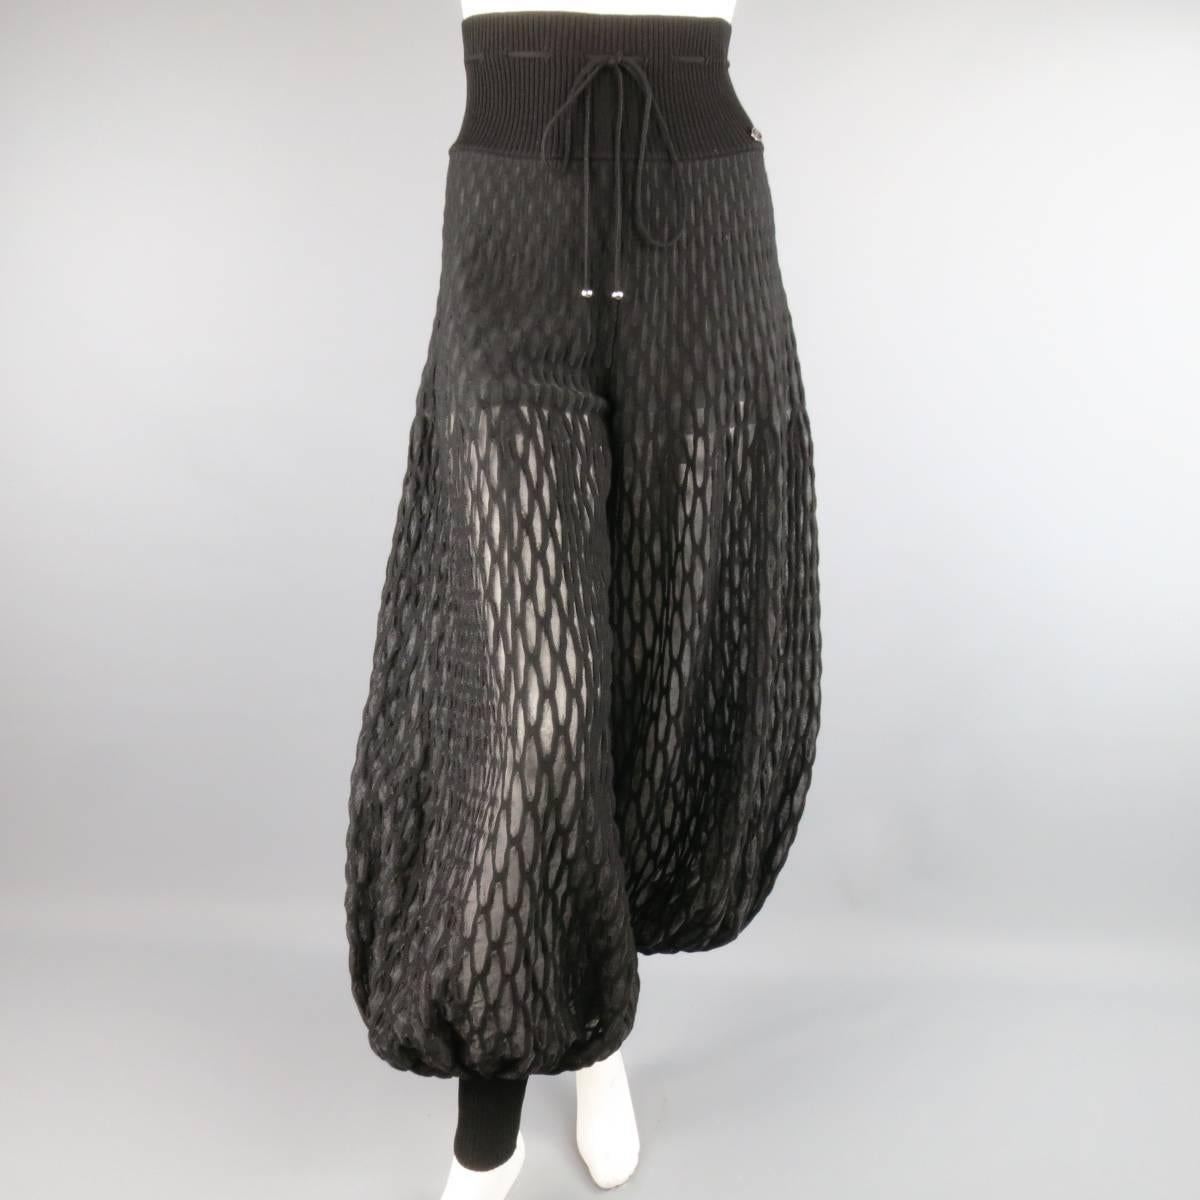 CHANEL high rise, drop crotch harem style pants come in a sheer net pattern knit and feature a dramatic balloon leg, thick ribbed knit waist and ankle bands, and gunmetal tone detail at waist.
Semi-opaque through upper portion. Made in Italy.
